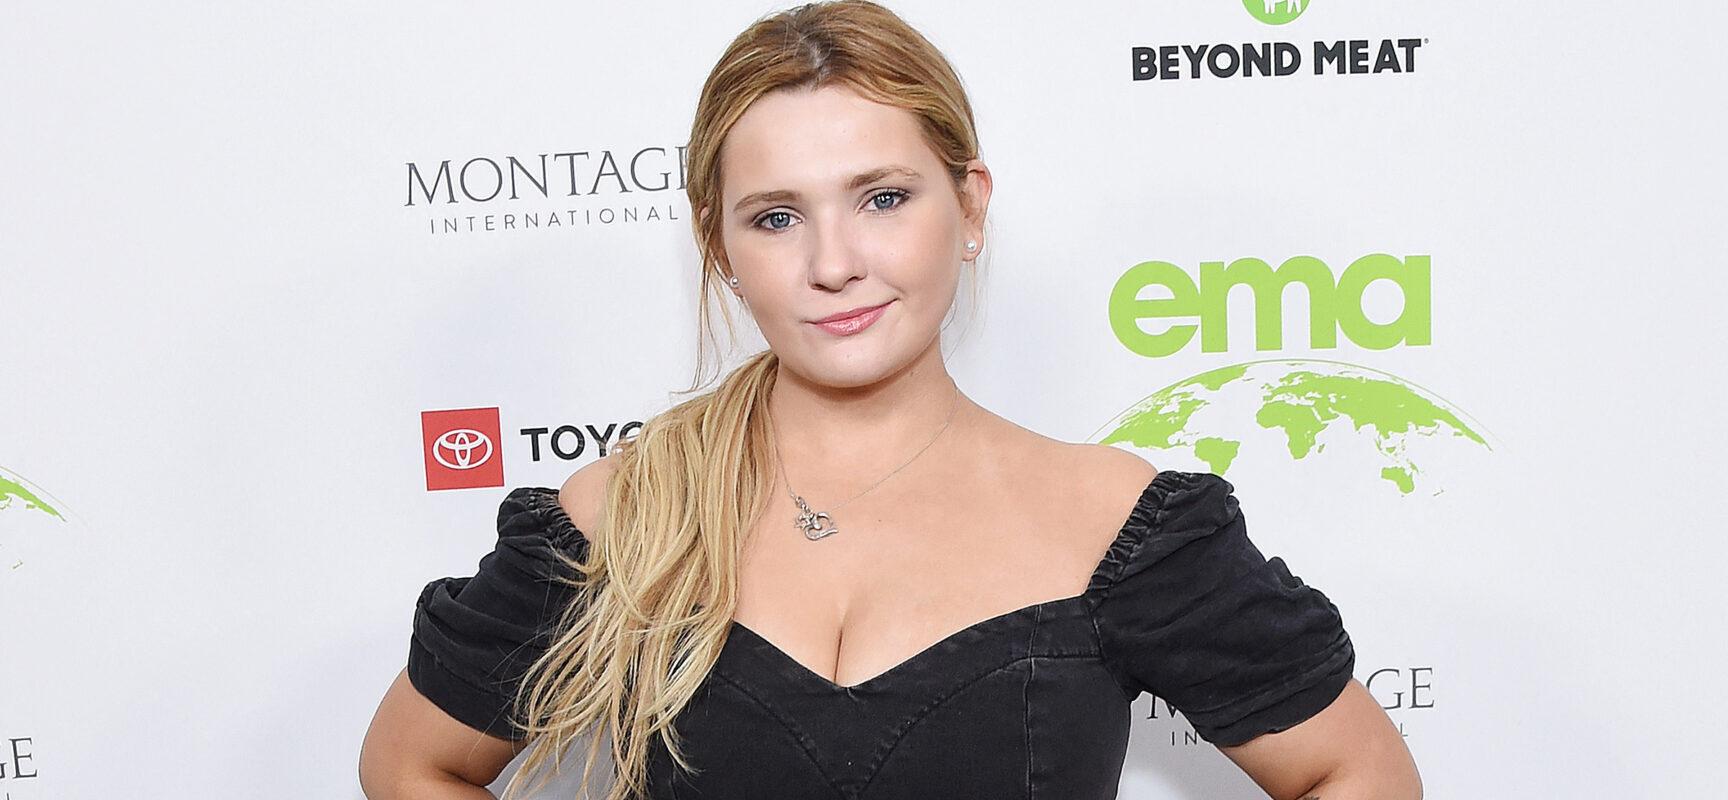 Abigail Breslin Accuses Aaron Eckhart Of 'Aggressive, Demeaning' Behavior On Set Of 'Classified'